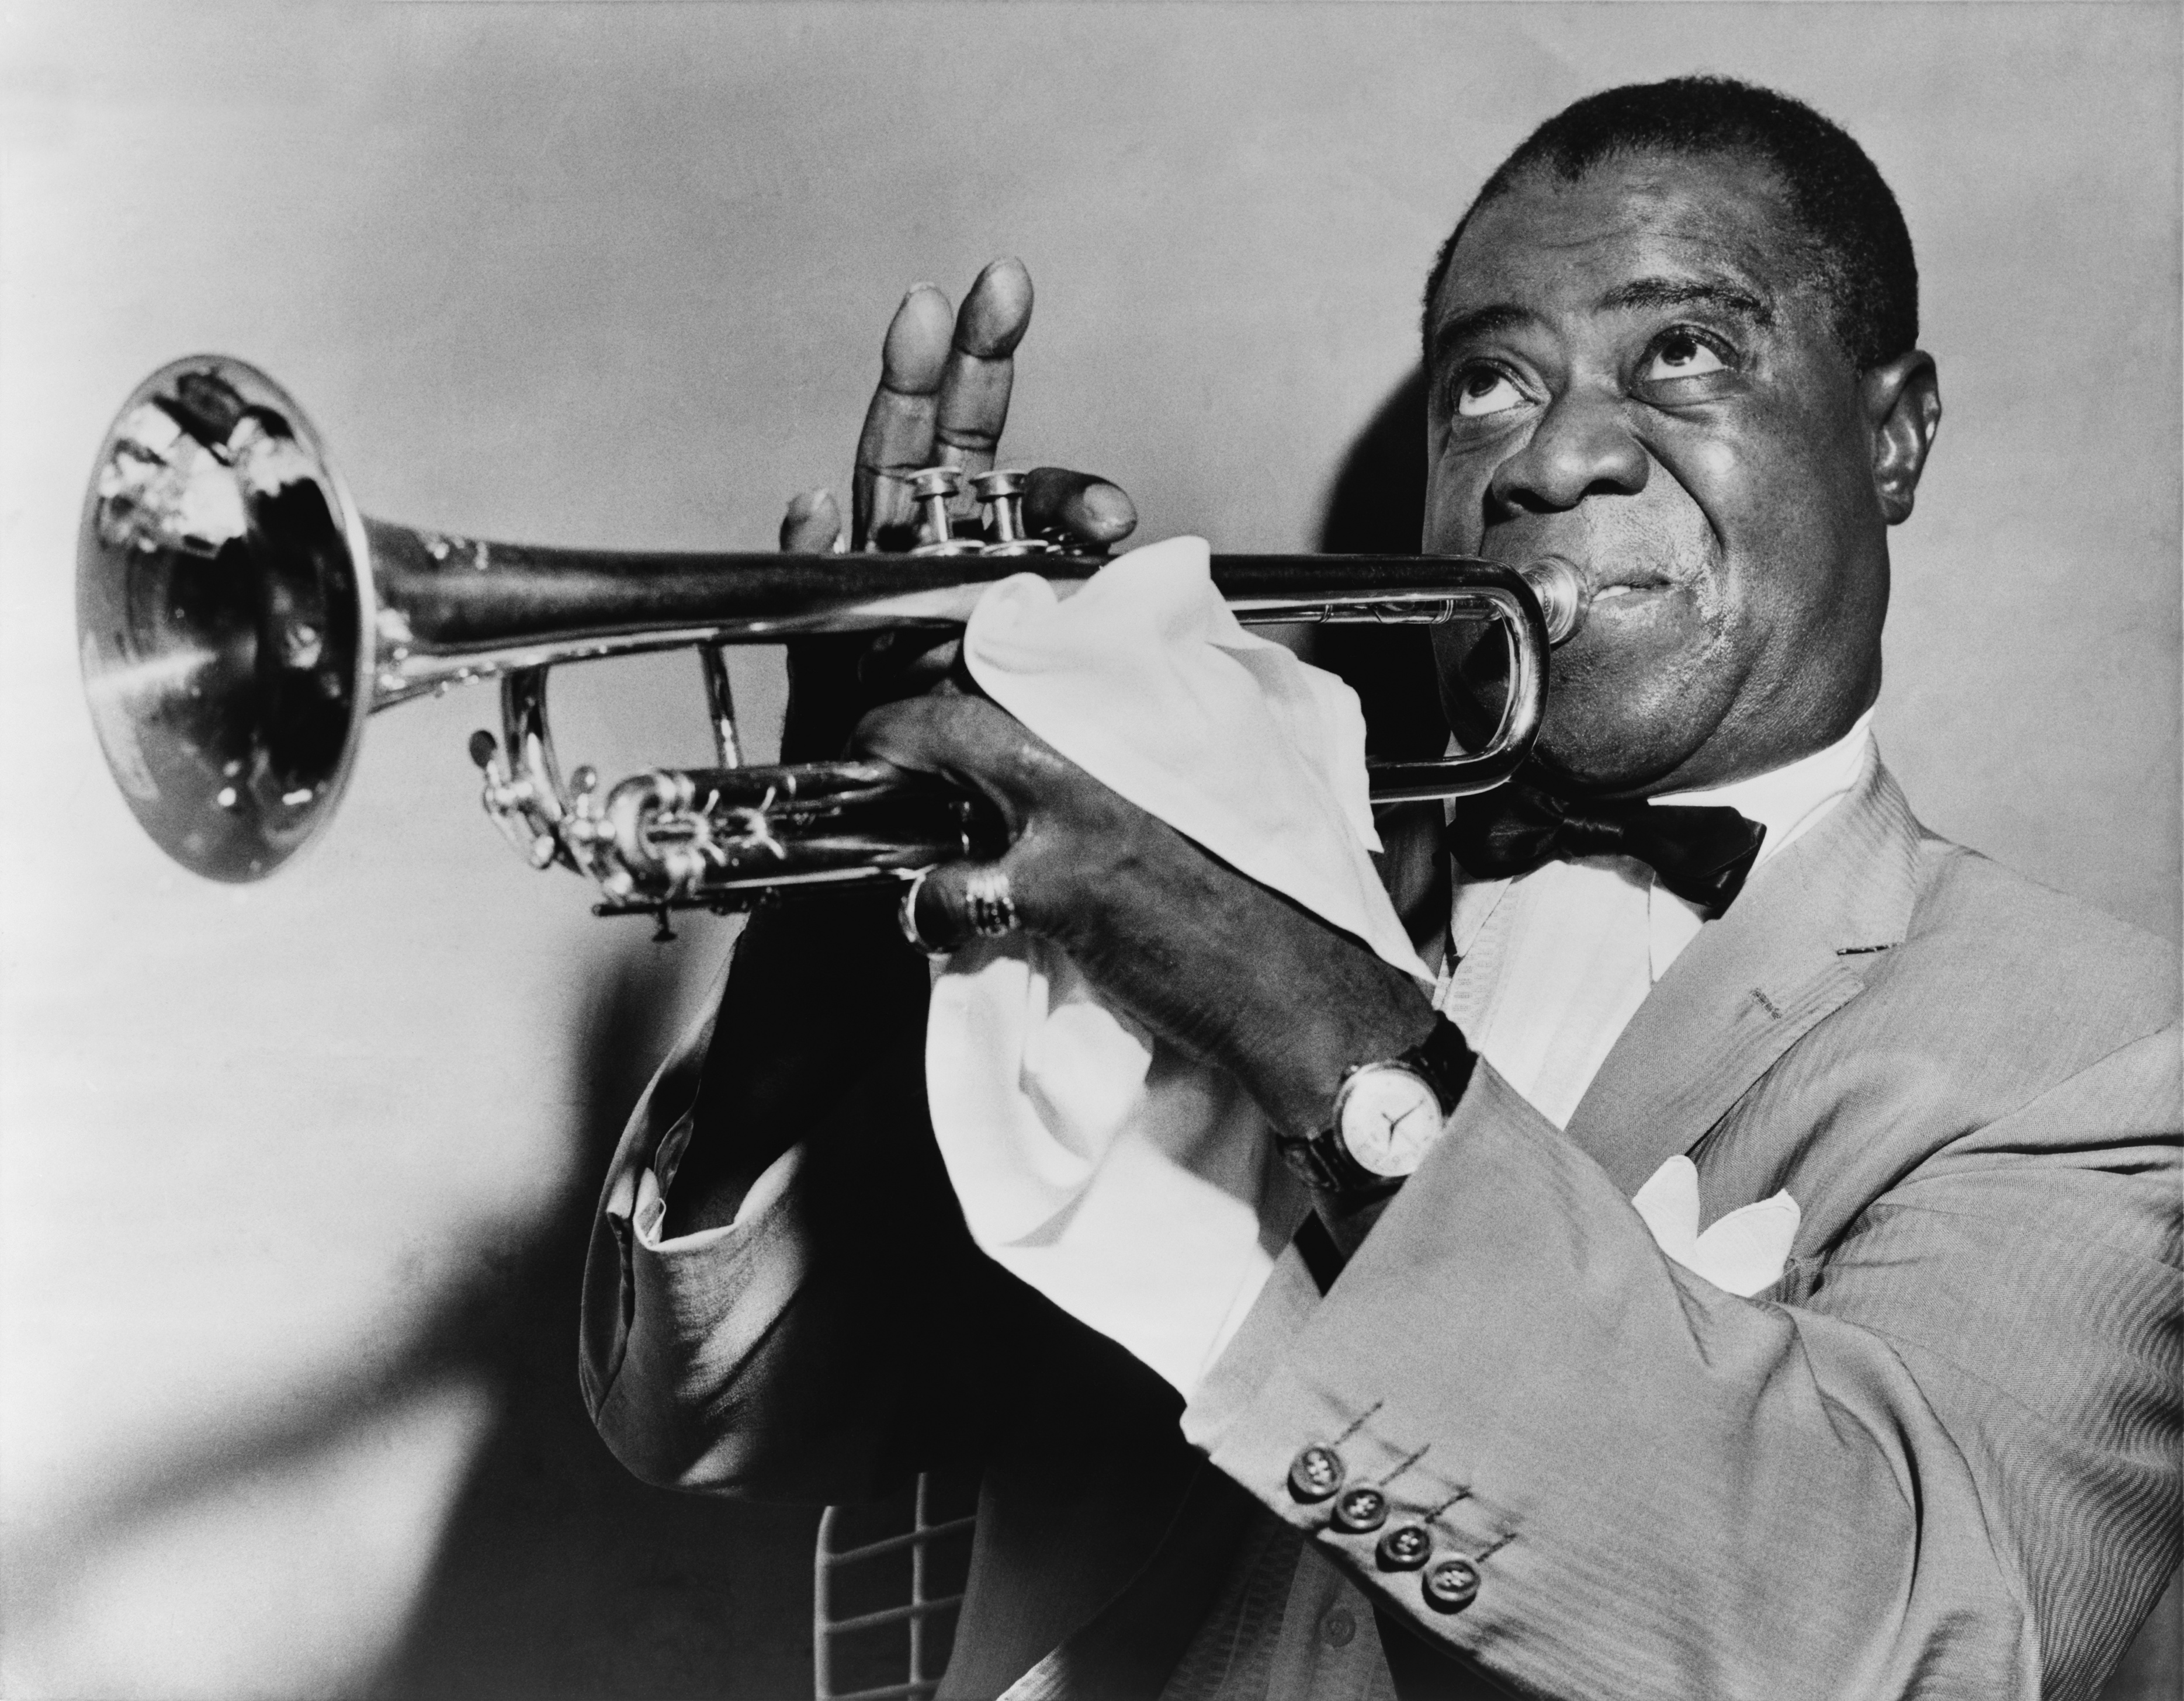 http://upload.wikimedia.org/wikipedia/commons/0/0e/Louis_Armstrong_restored.jpg